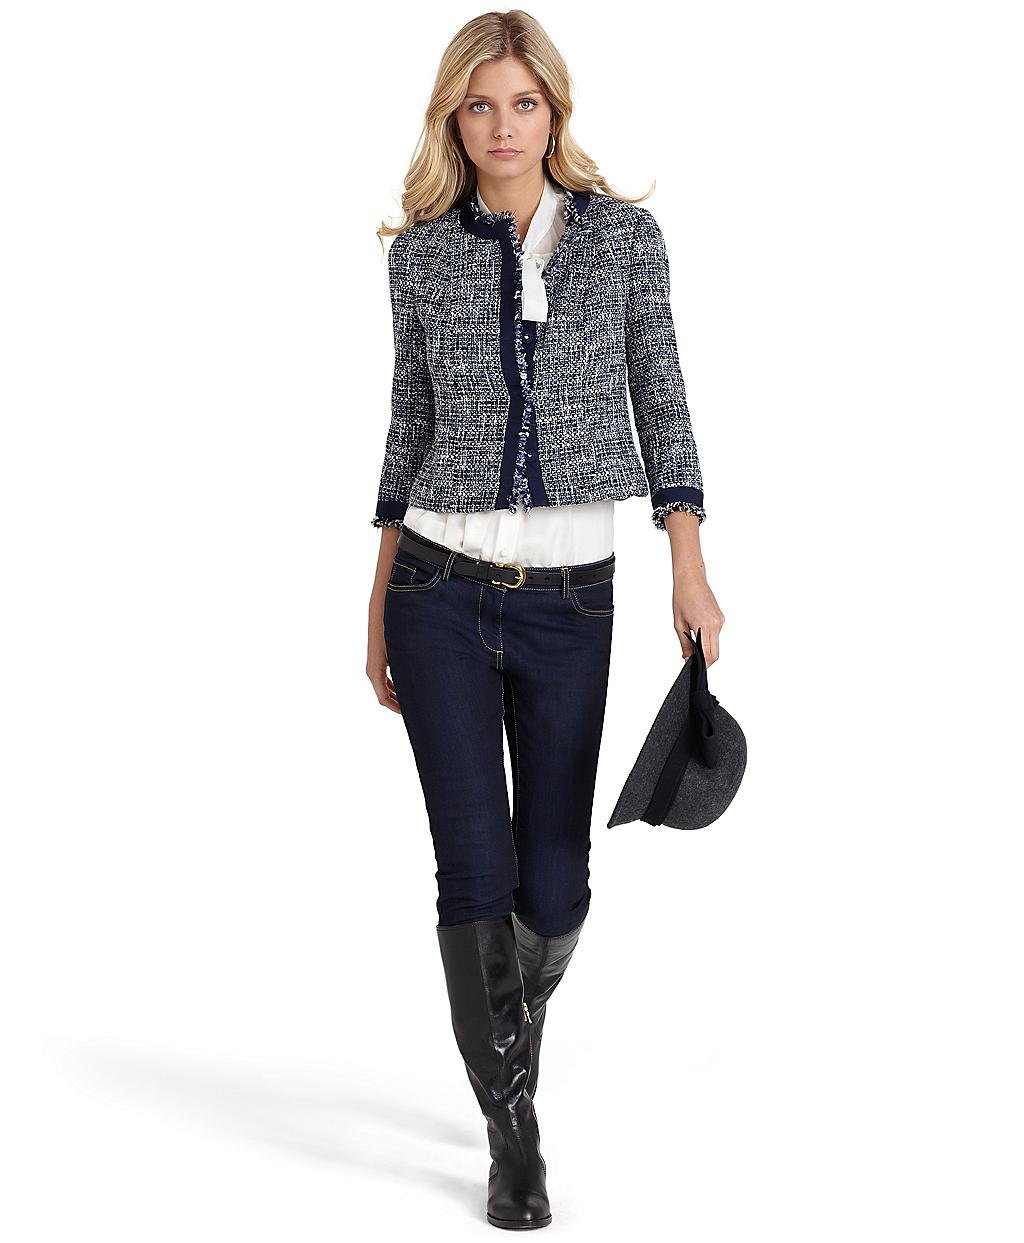 Lyst - Brooks brothers Wool Blend Boucle Jacket in Blue